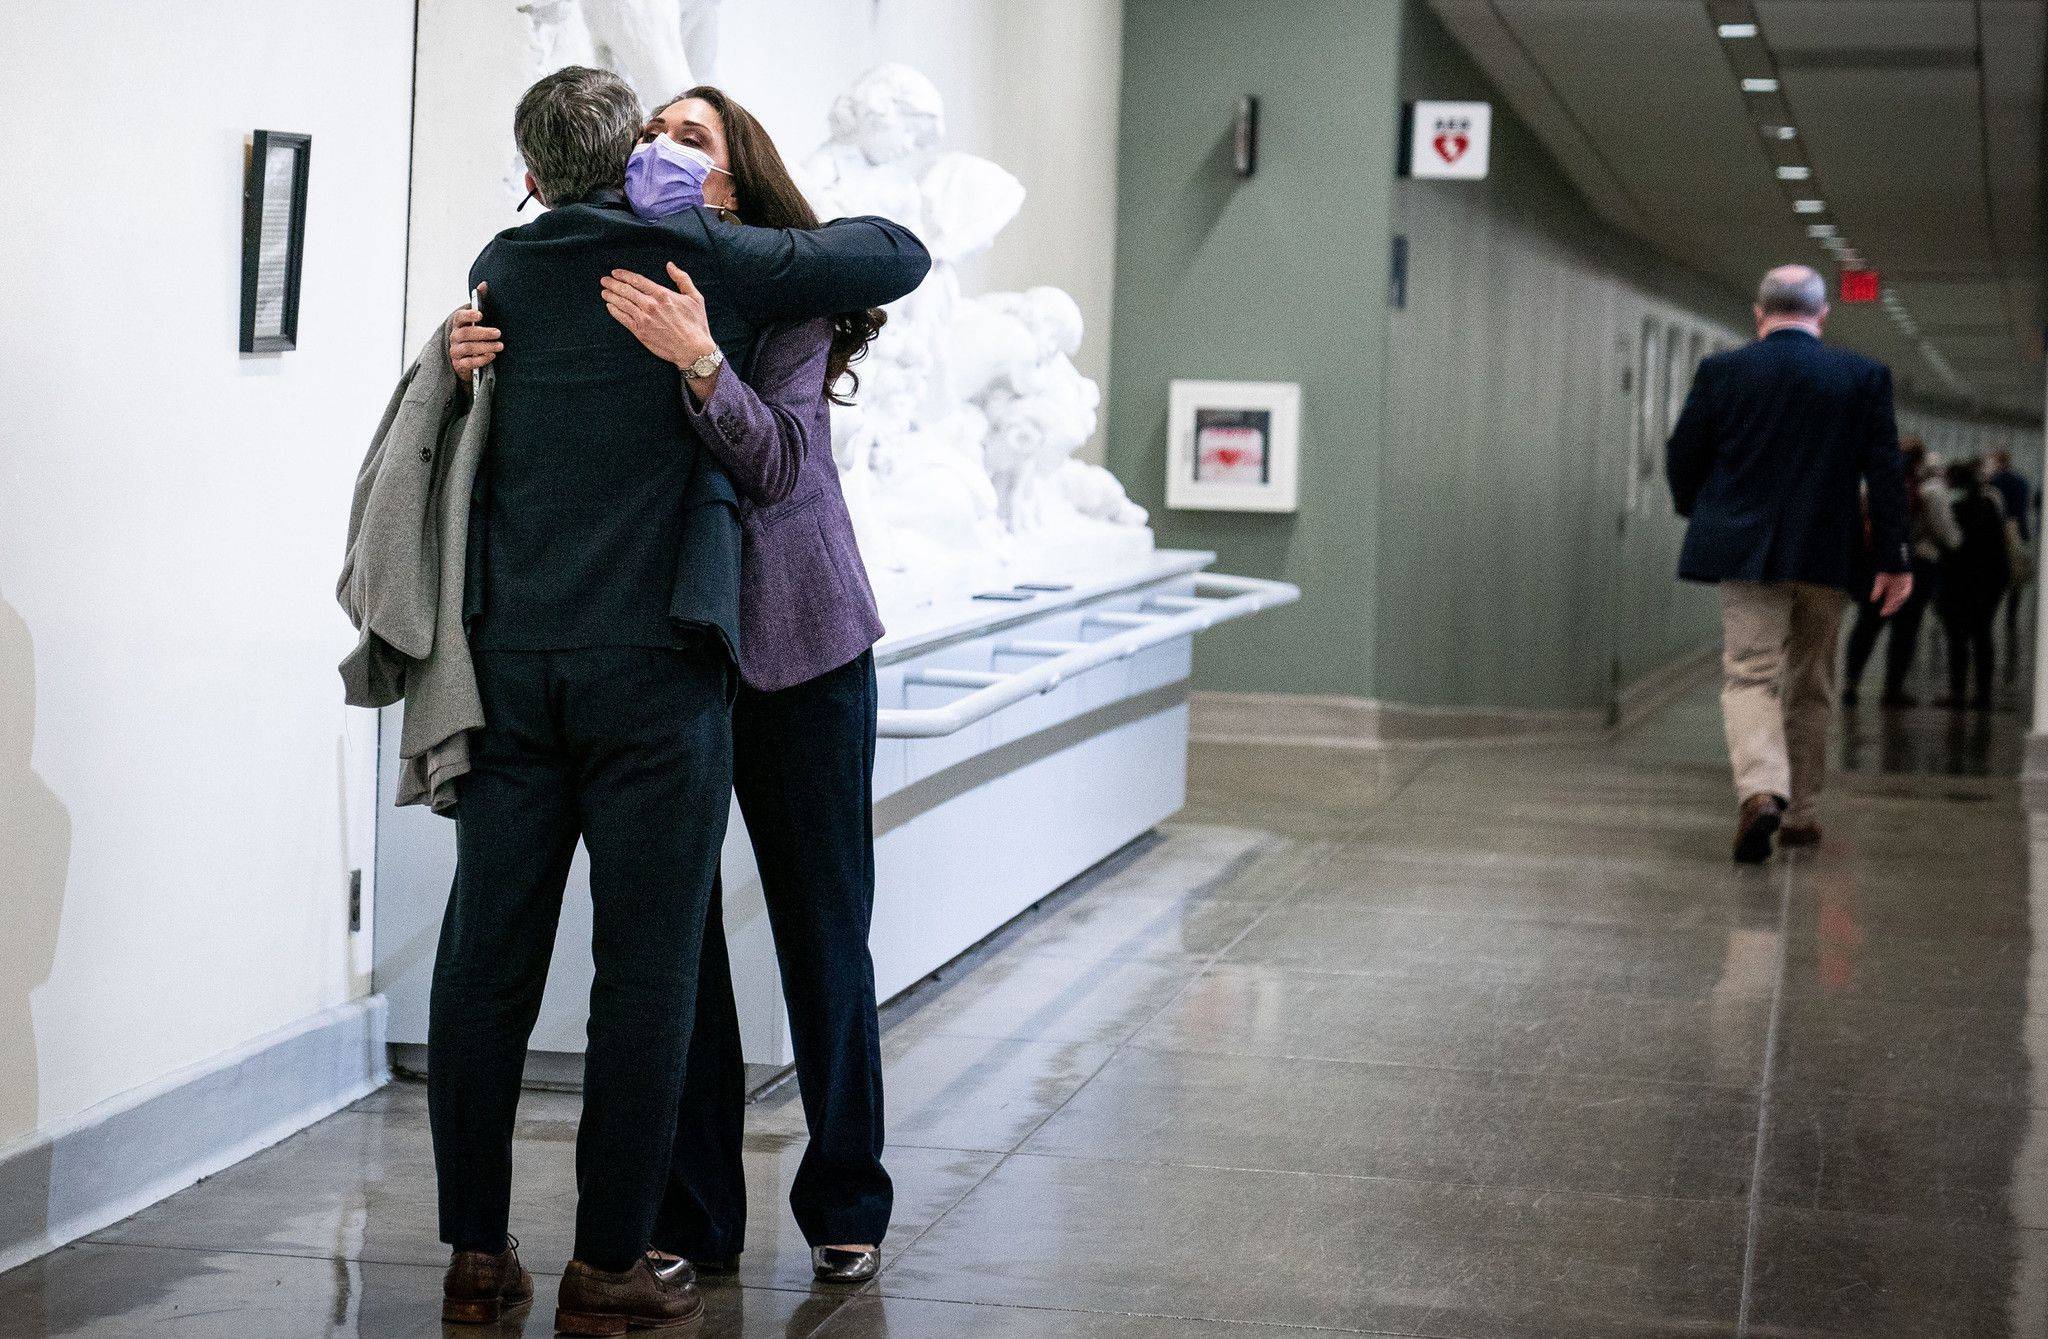 Armando L. Sanchez/Chicago Tribune
Reps. Adam Kinzinger, R-Ill., and Jaime Herrera Beutler, R-Wash., who both voted to impeach President Donald Trump, exchange a hug during the vote at the Capitol in Washington, D.C., on Jan. 13.